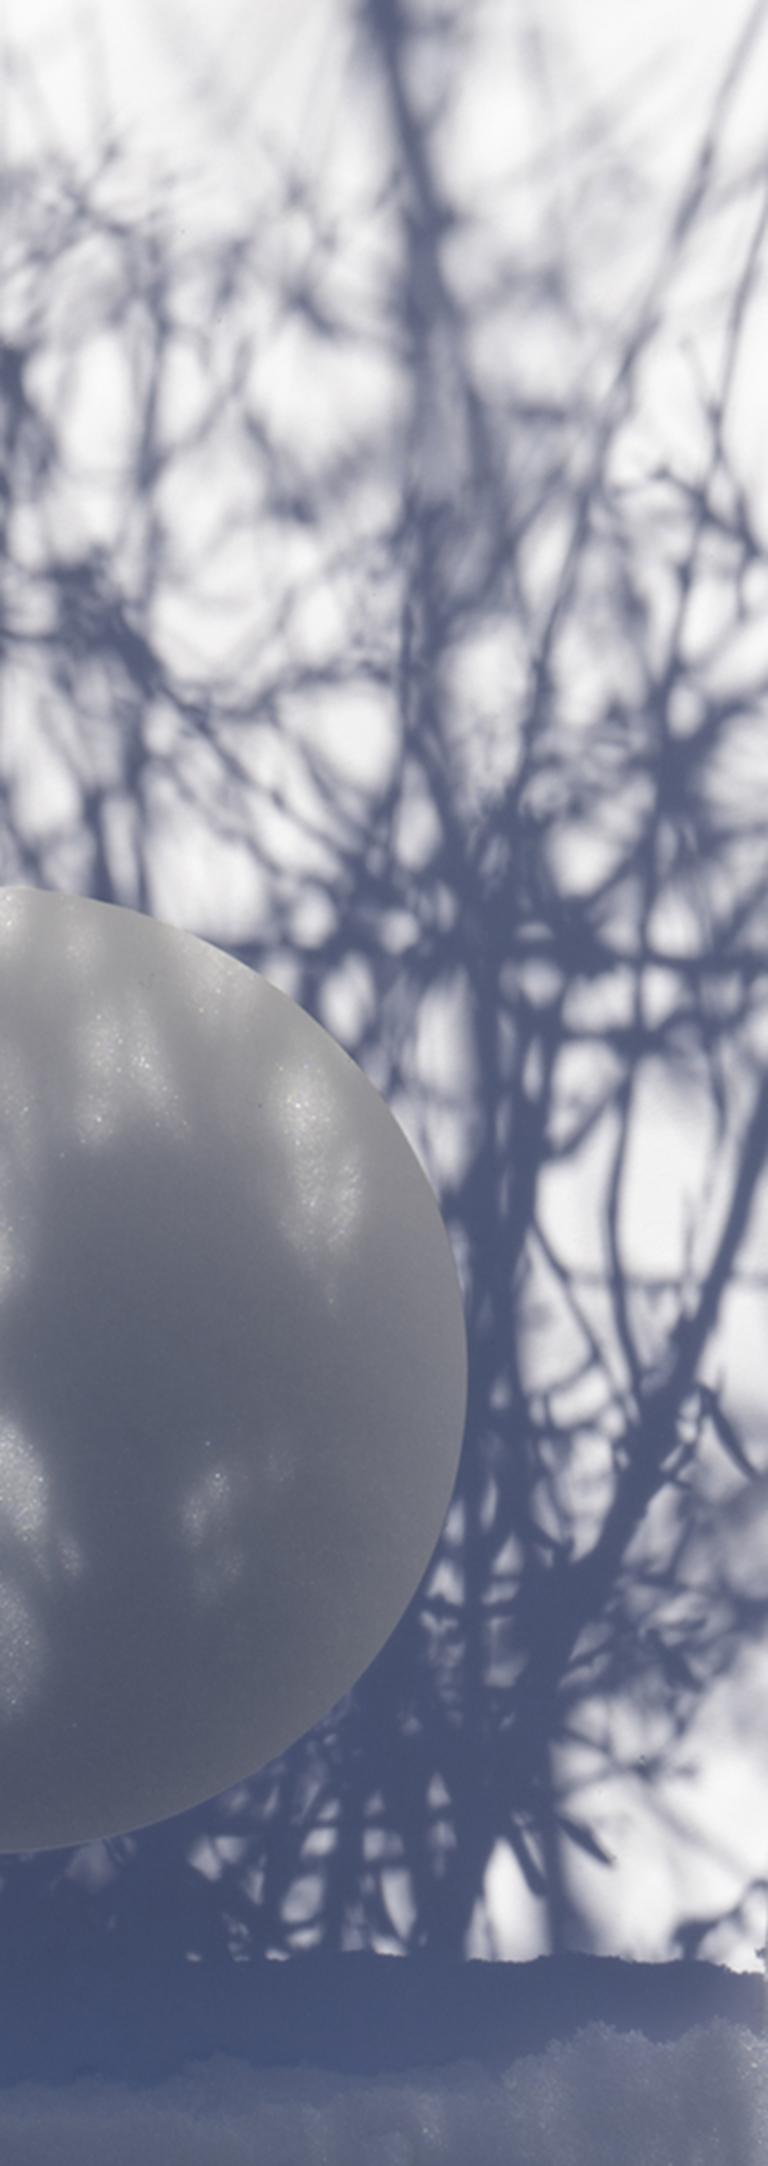 Shadow Legacy no. 2 - Blue & white circle abstract, snow tree branches landscape - Abstract Geometric Photograph by Brenda Biondo